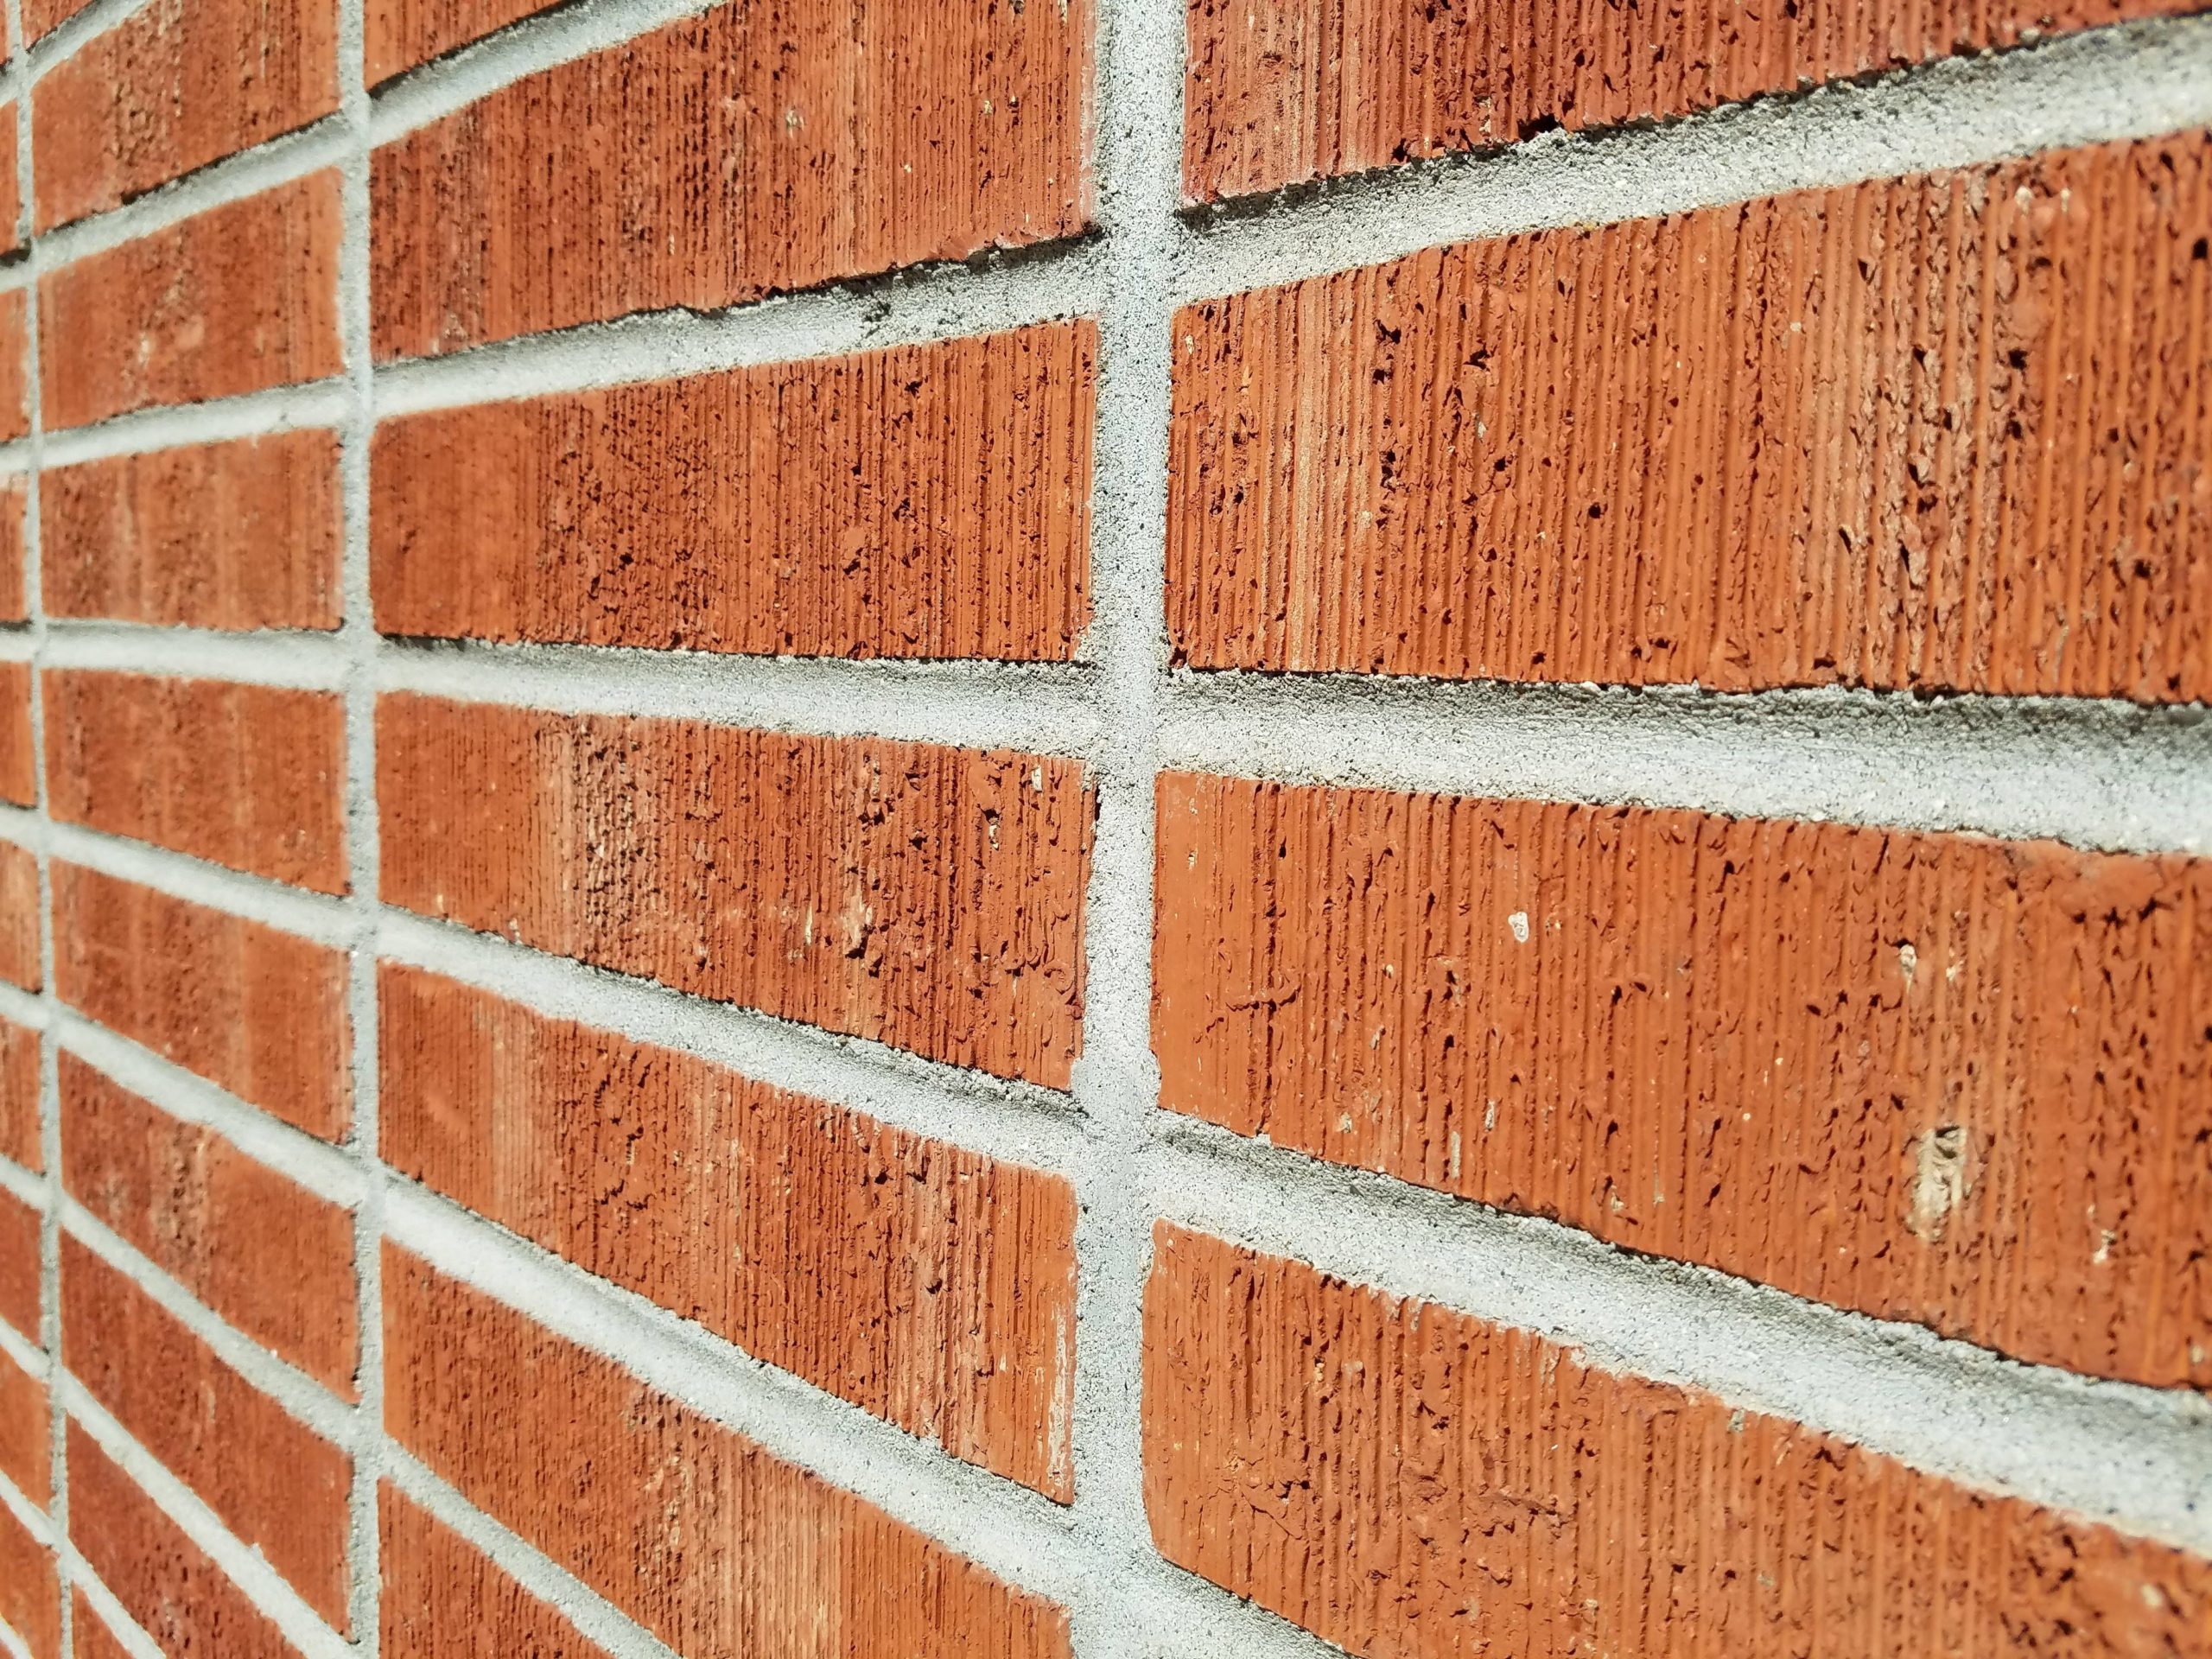 Red Brick Wall with Concave Mortar Joint